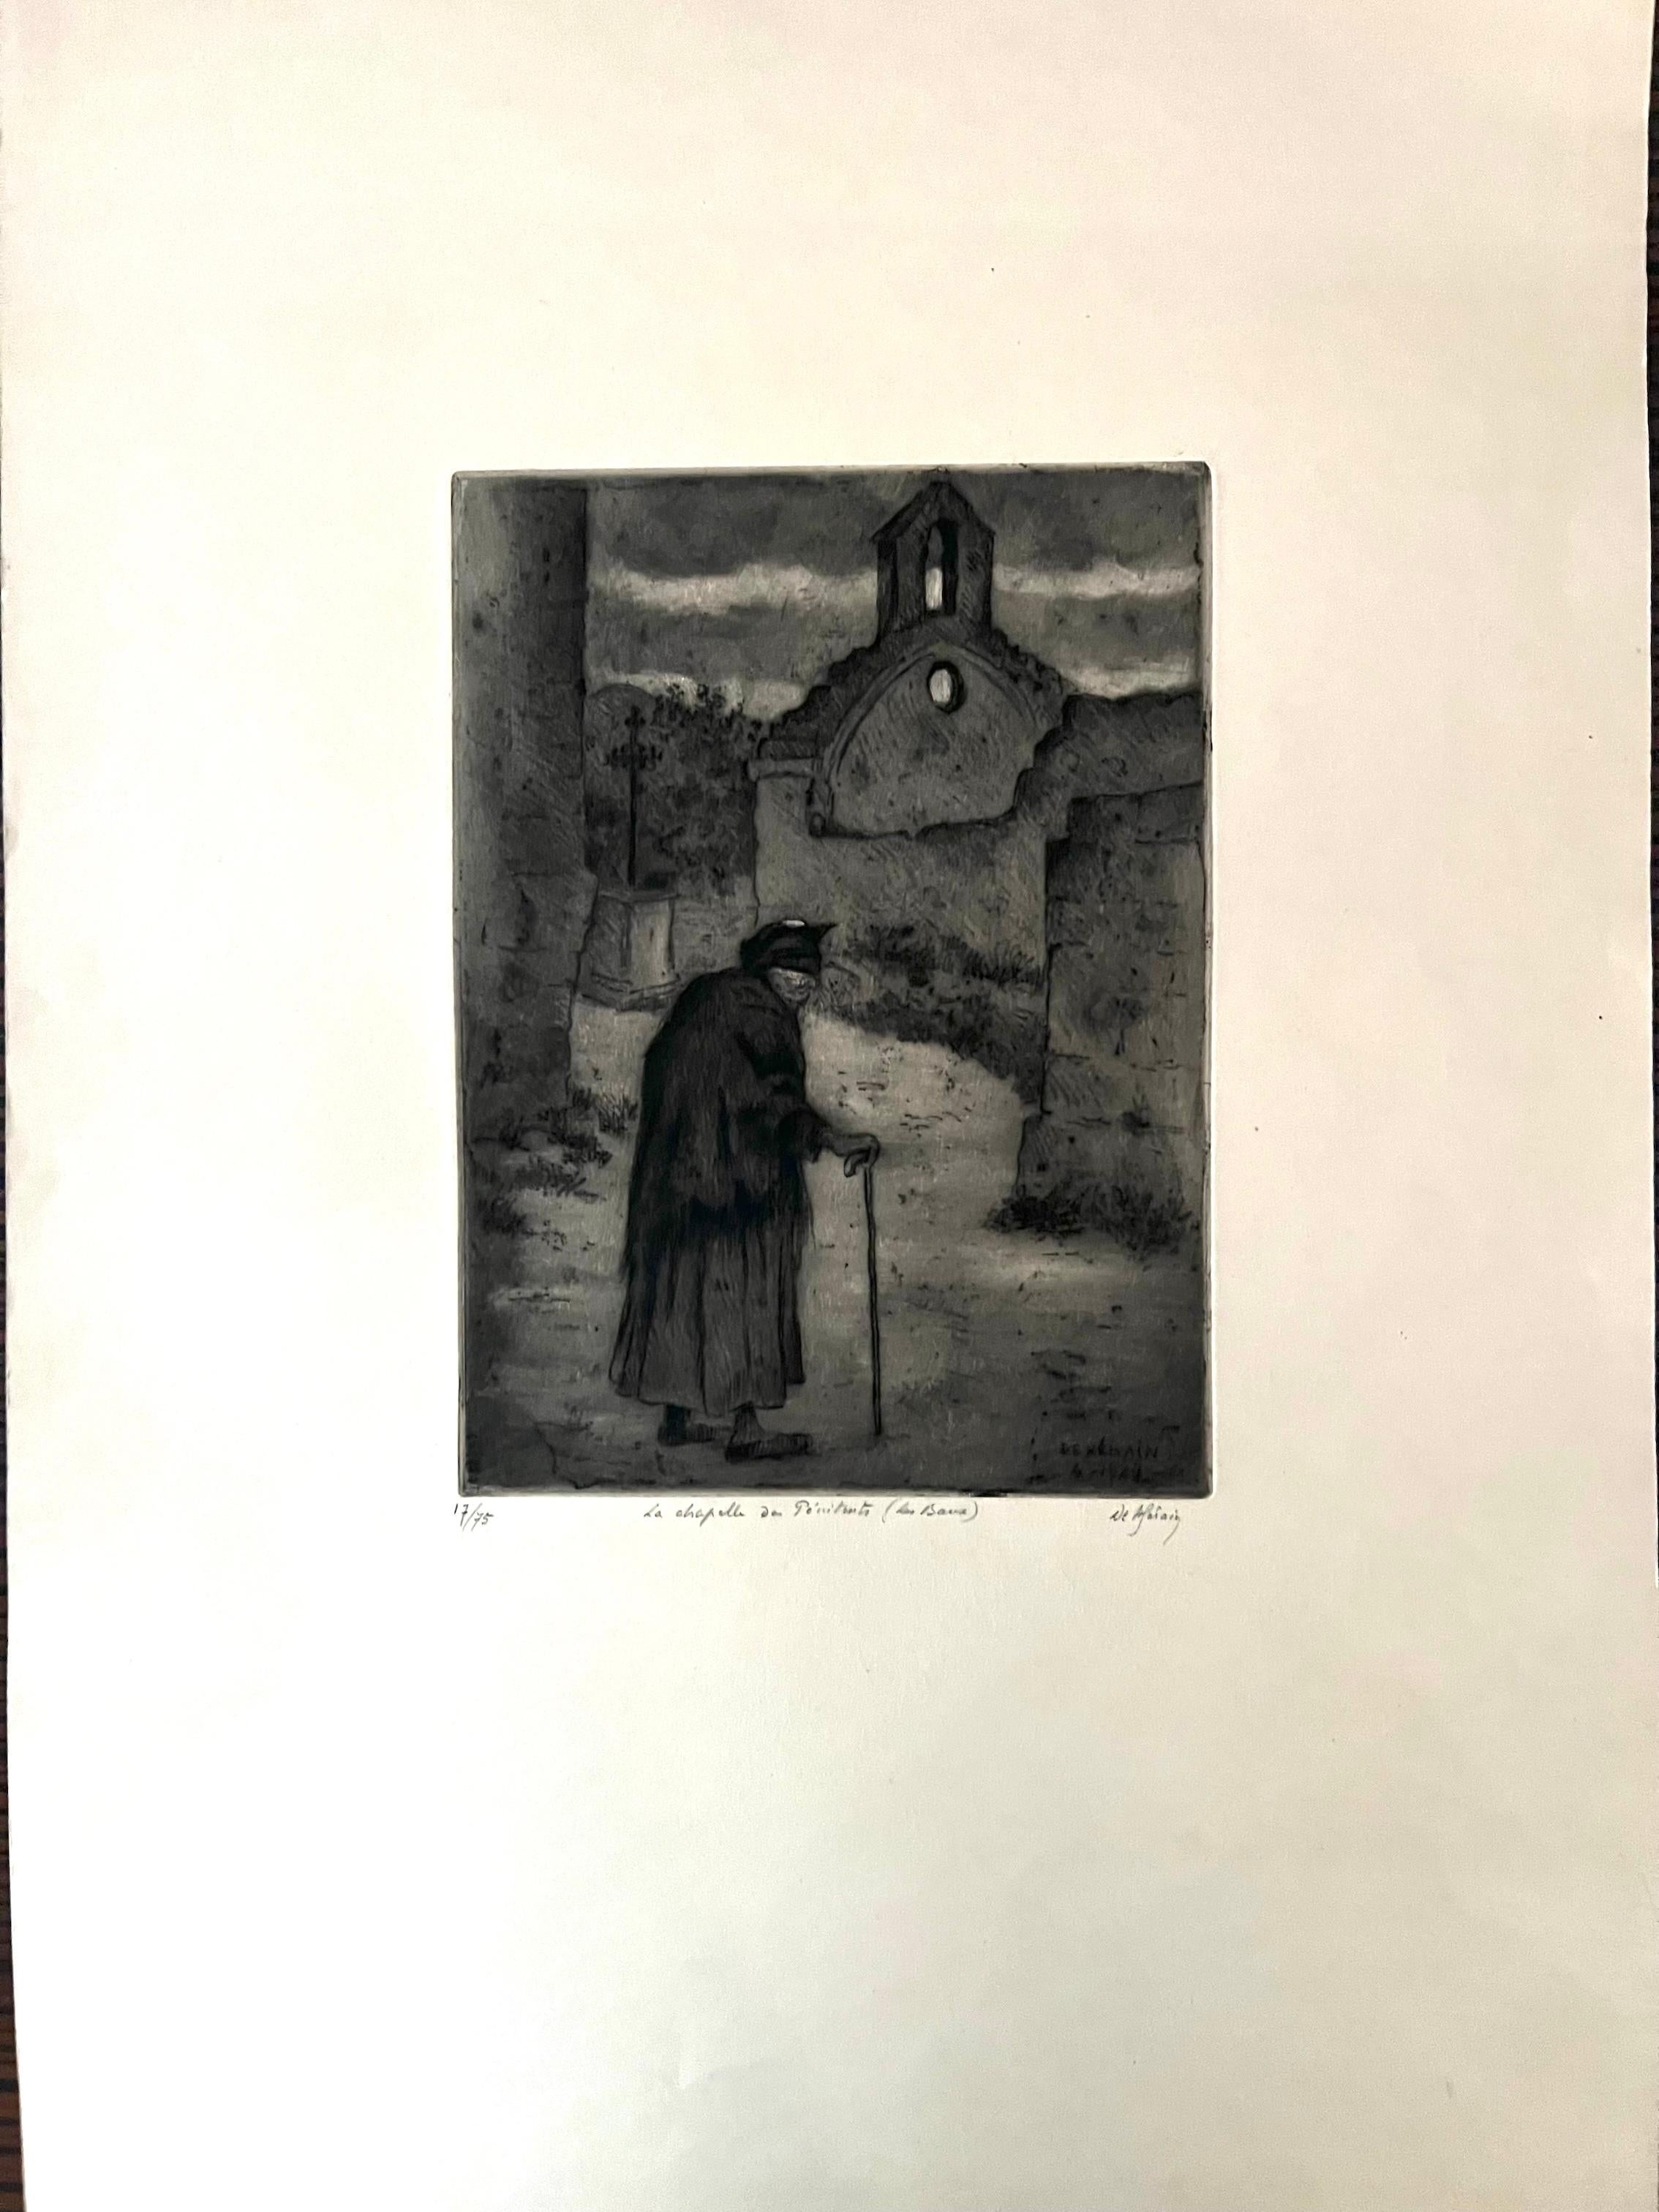 François DE HERAIN (1877-1962) is a French painter, sculptor and engraver. 
The drawing depicts an elderly woman making her way to the Church Square at the Chapel of the Penitents in Les Baux de Provence, near the French Riviera. This secular